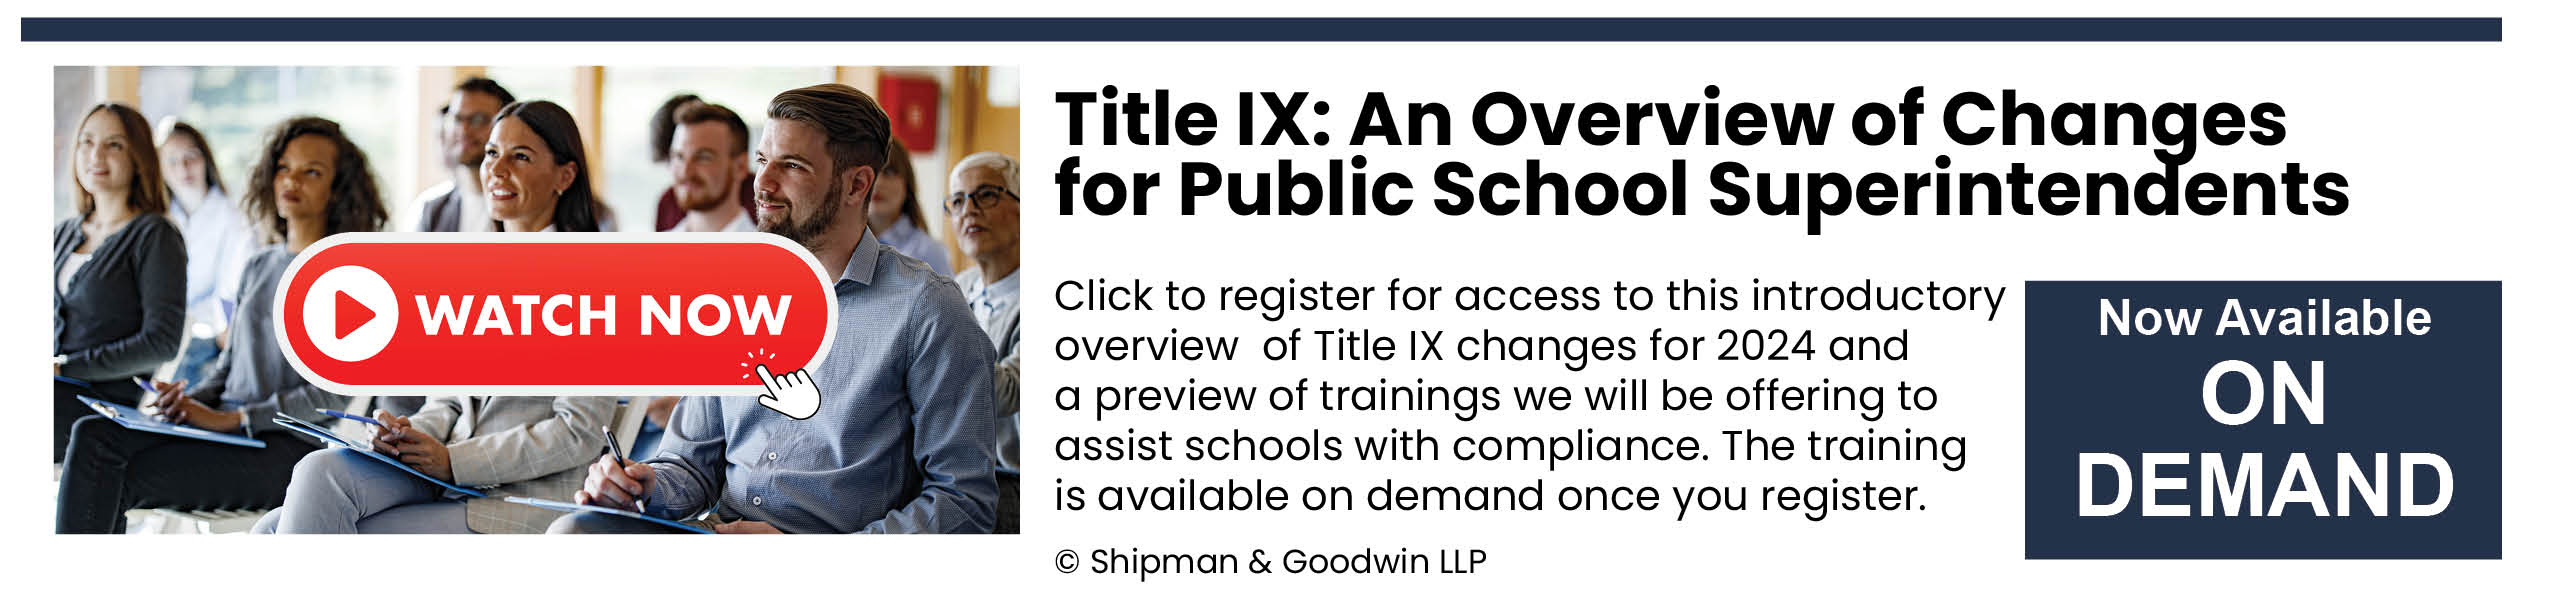 click to register for free on-demand introductory Title IX for public schools overview